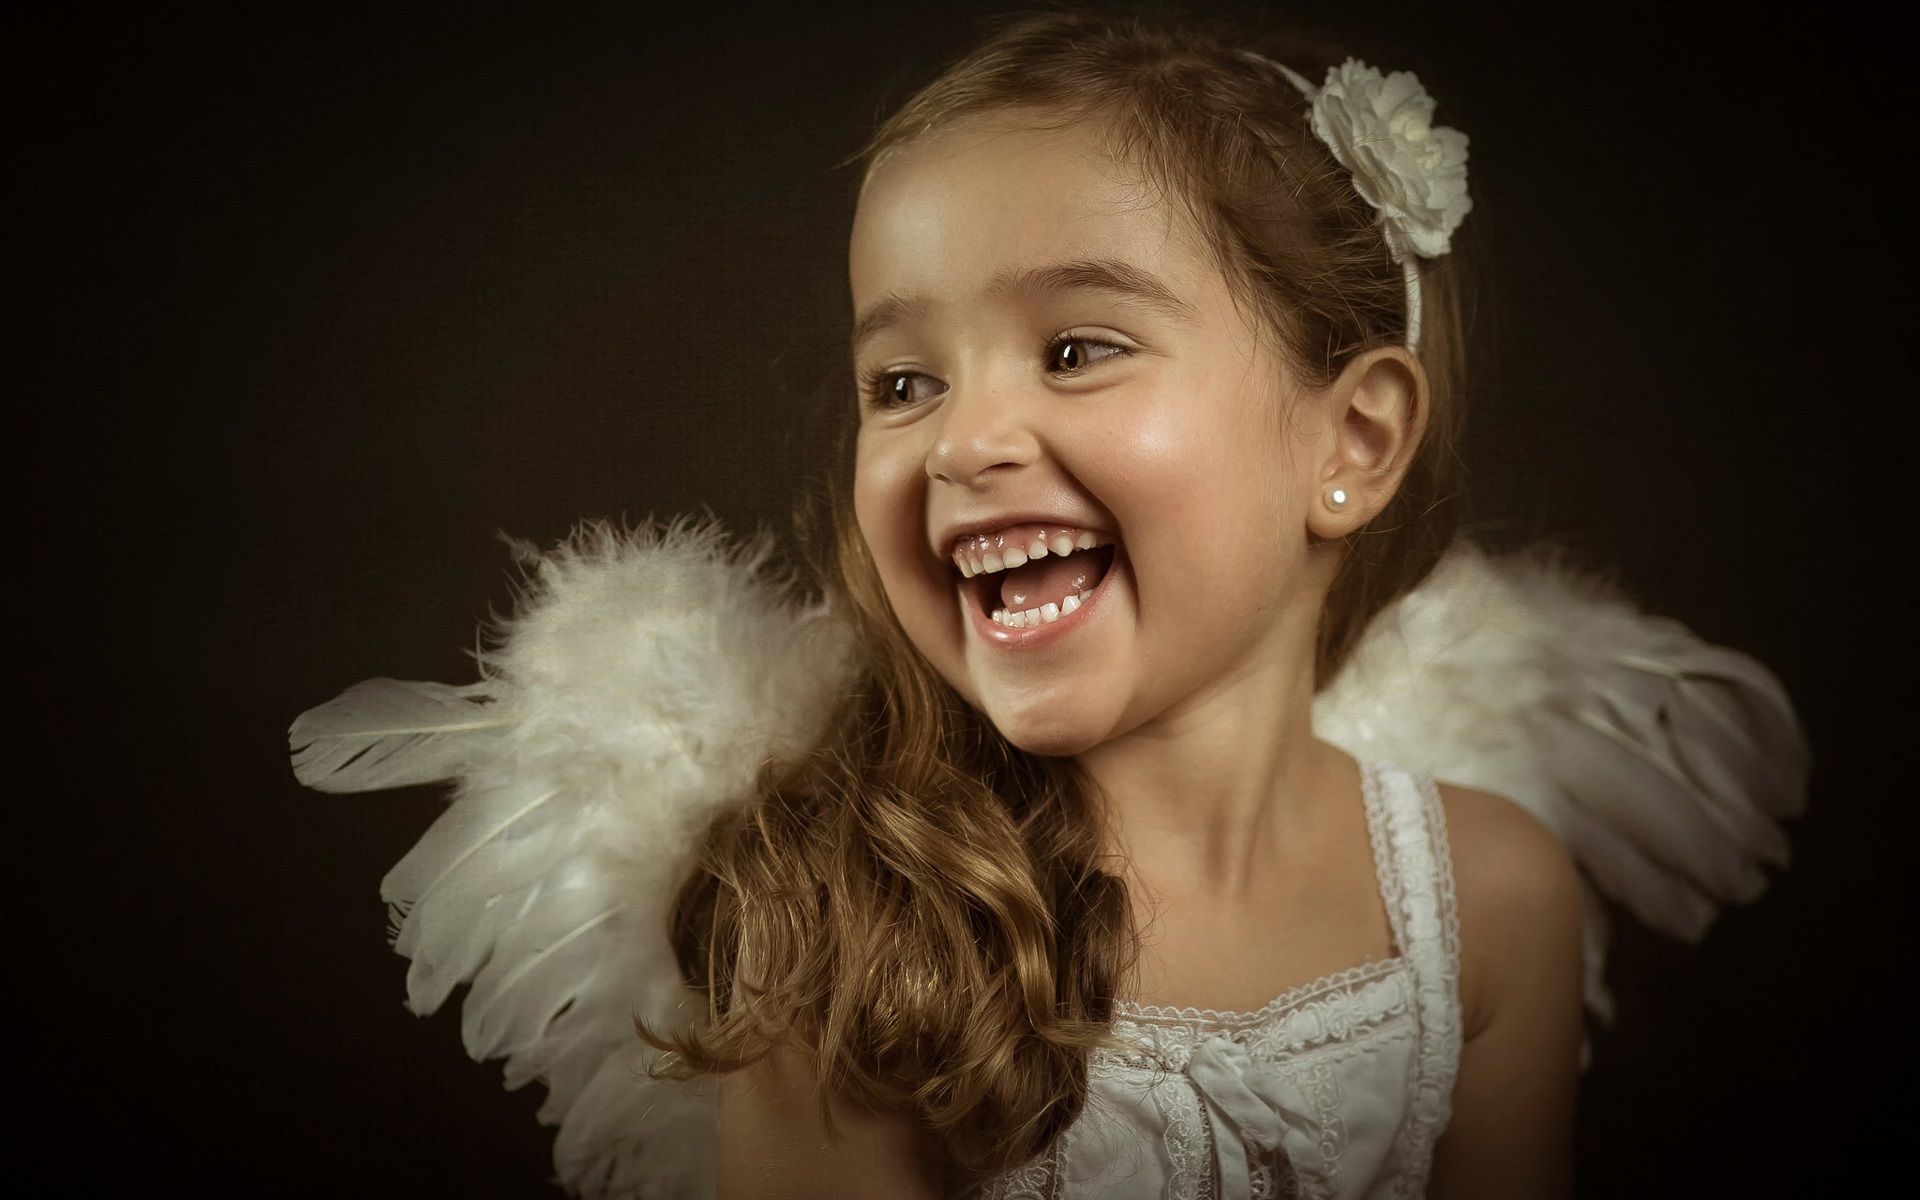 Little Angel, Cute Girl, Laughing, Portrait 640x1136 IPhone 5 5S 5C SE Wallpaper, Background, Picture, Image